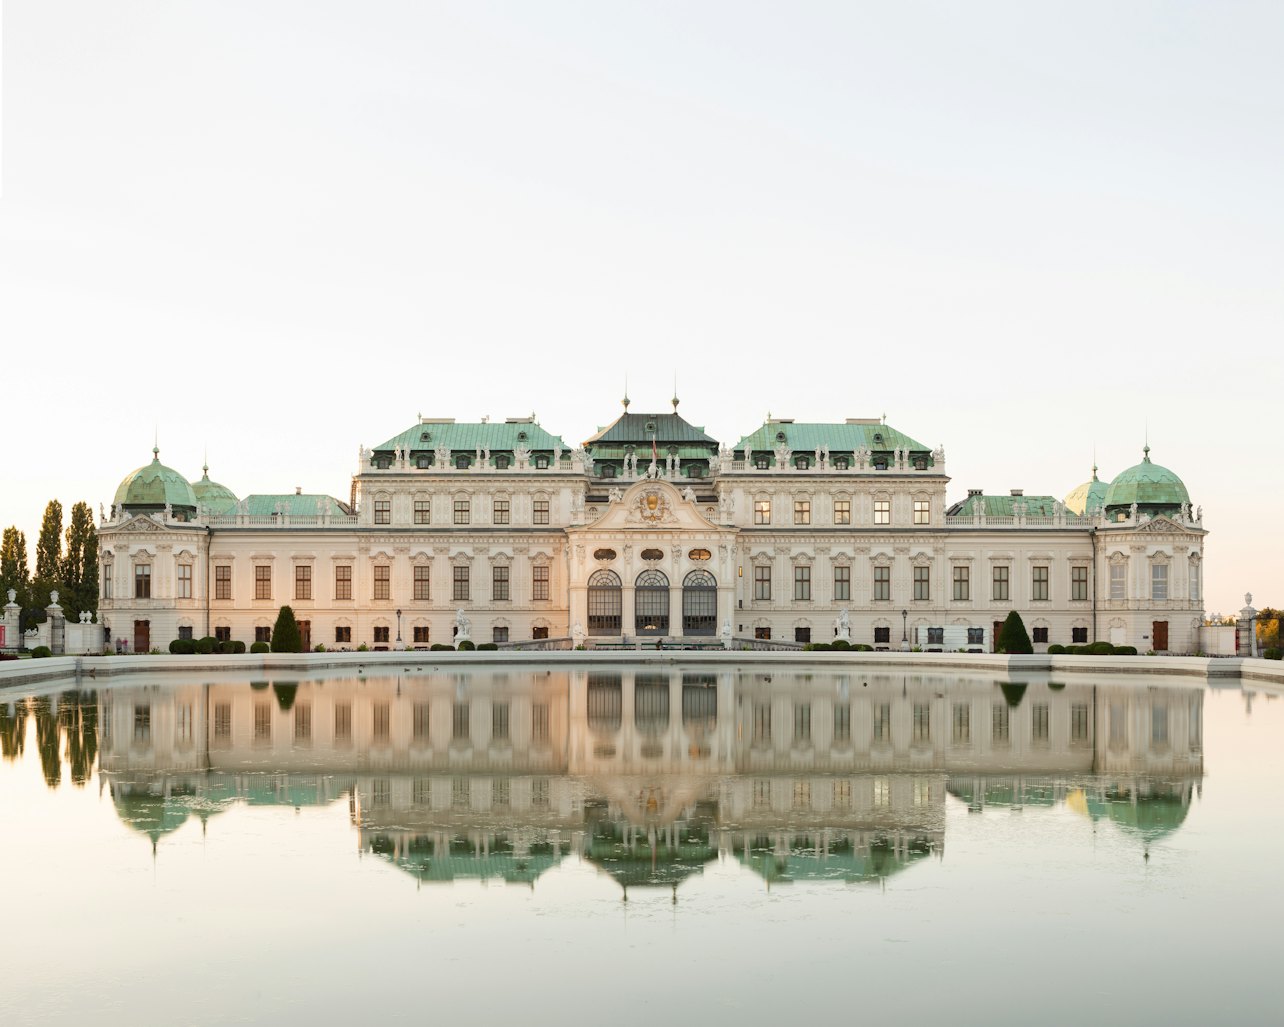 Belvedere Palace: Upper Belvedere - Accommodations in Vienna